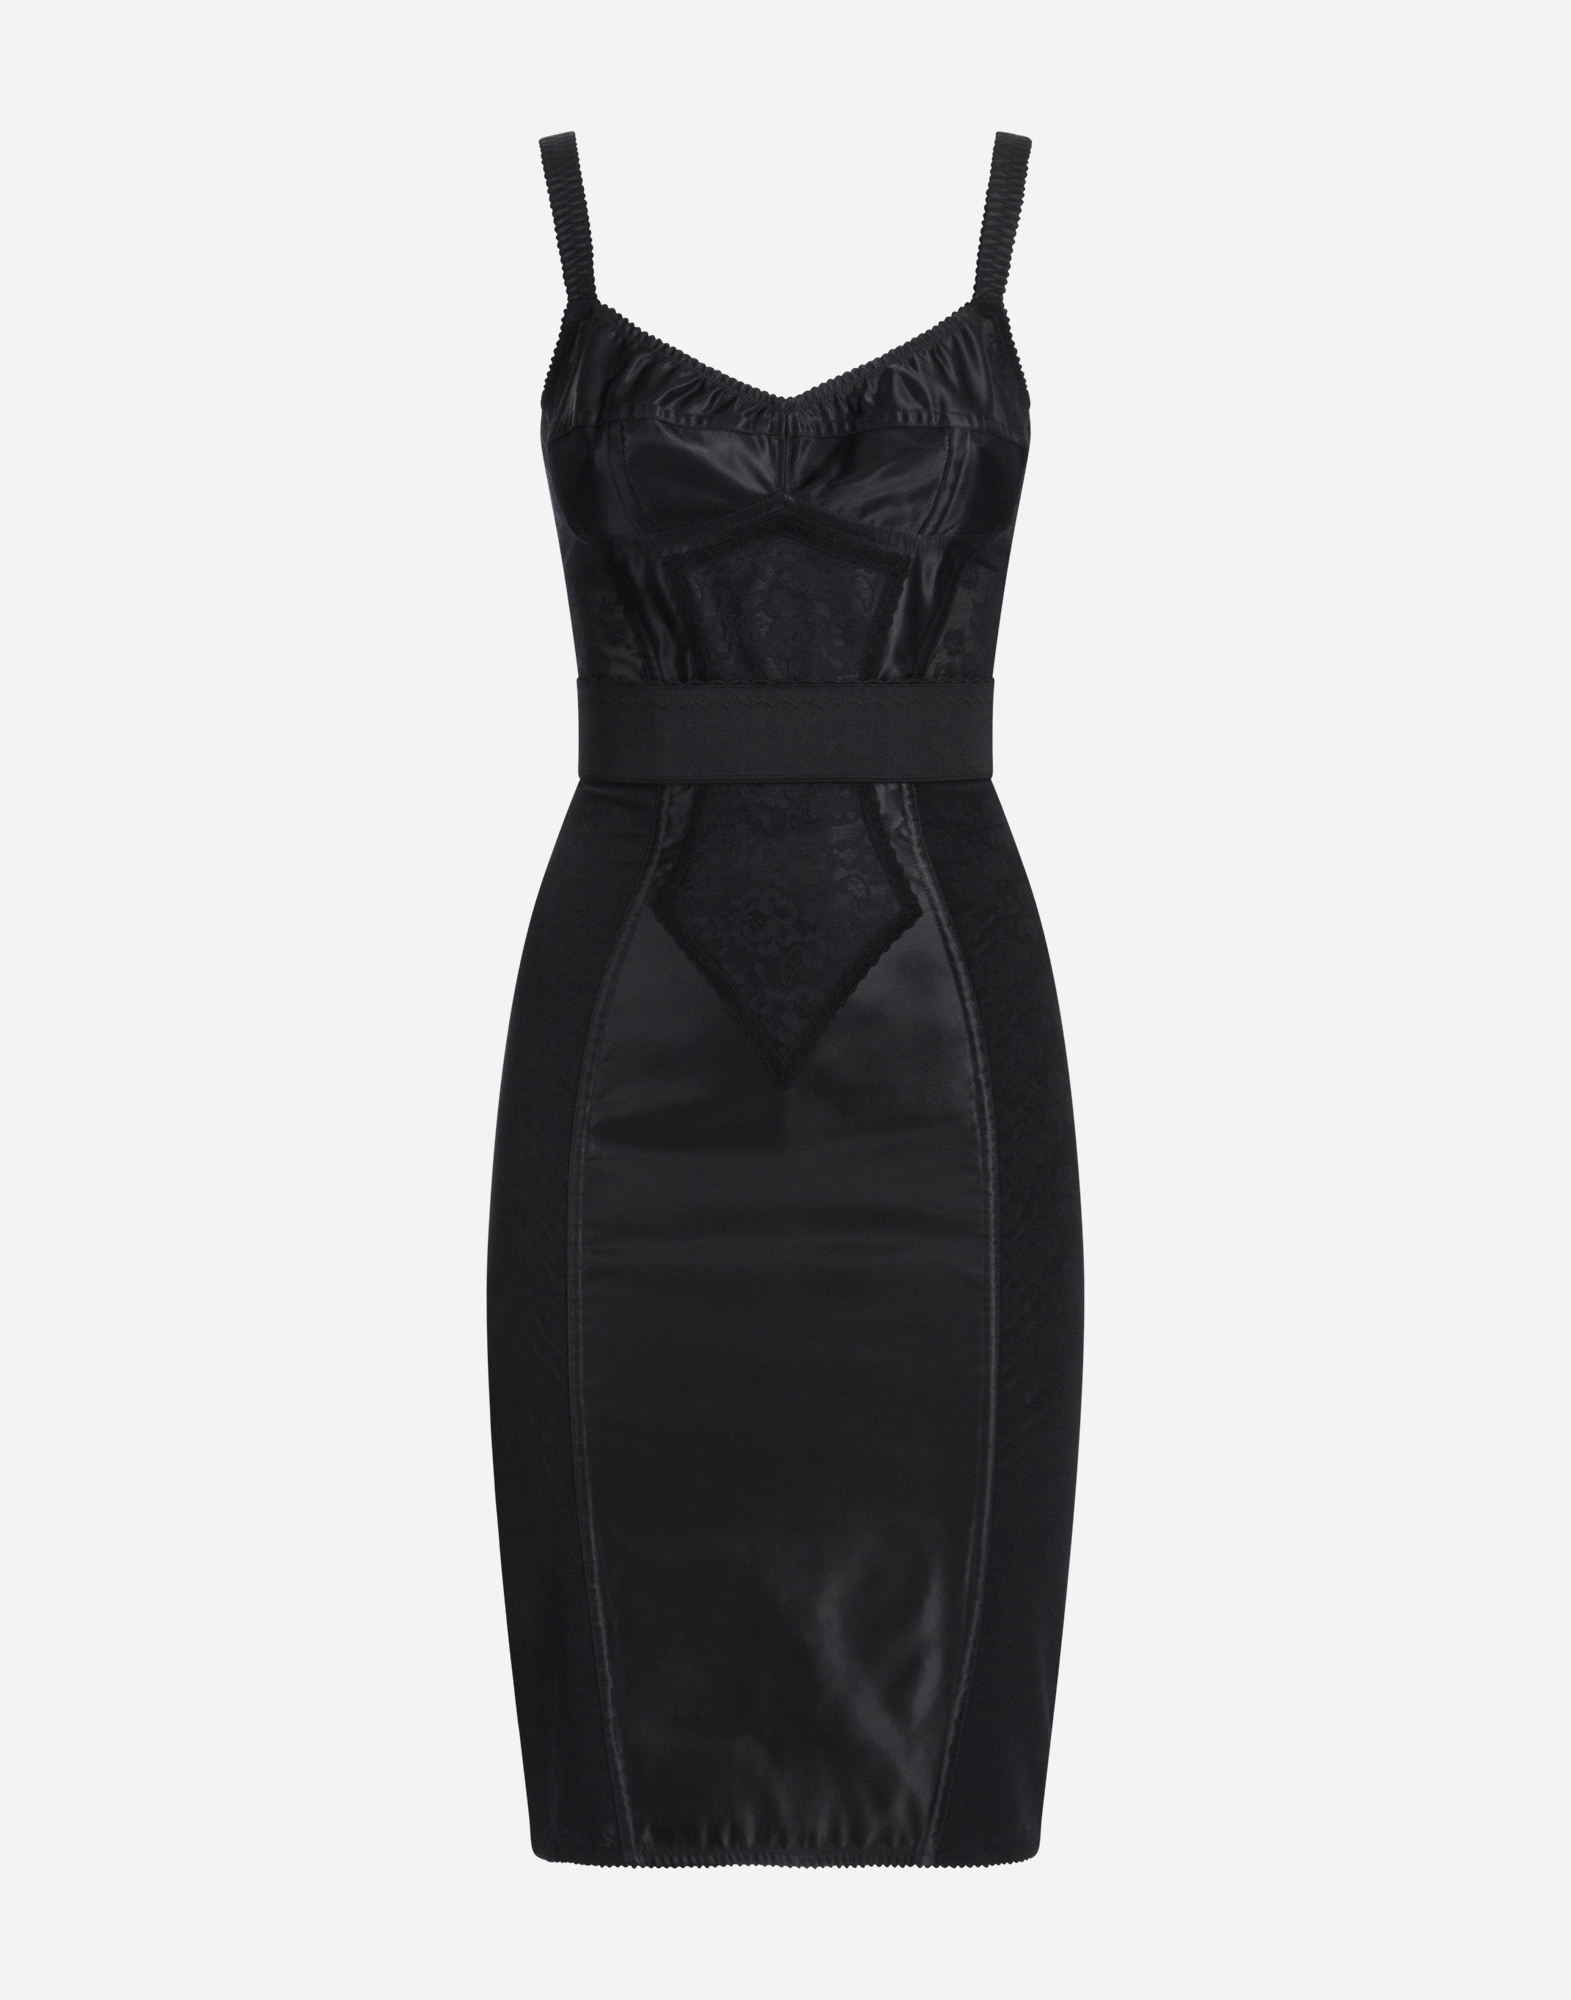 LACE AND SATIN CORSET DRESS in BLACK for Women | Dolce&Gabbana®